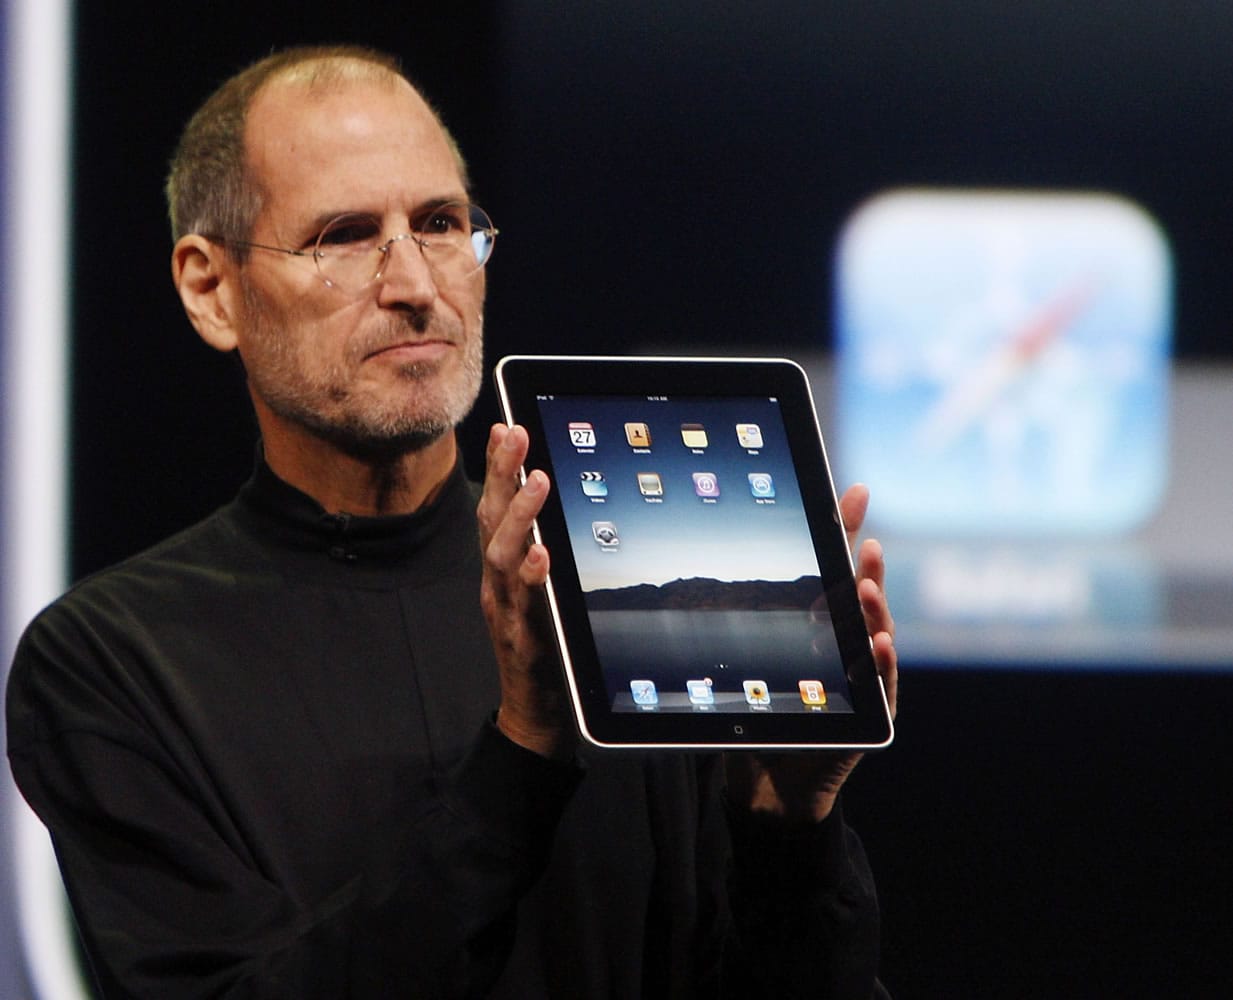 Apple CEO Steve Jobs shows off an iPad during an event in San Francisco in January 2010.